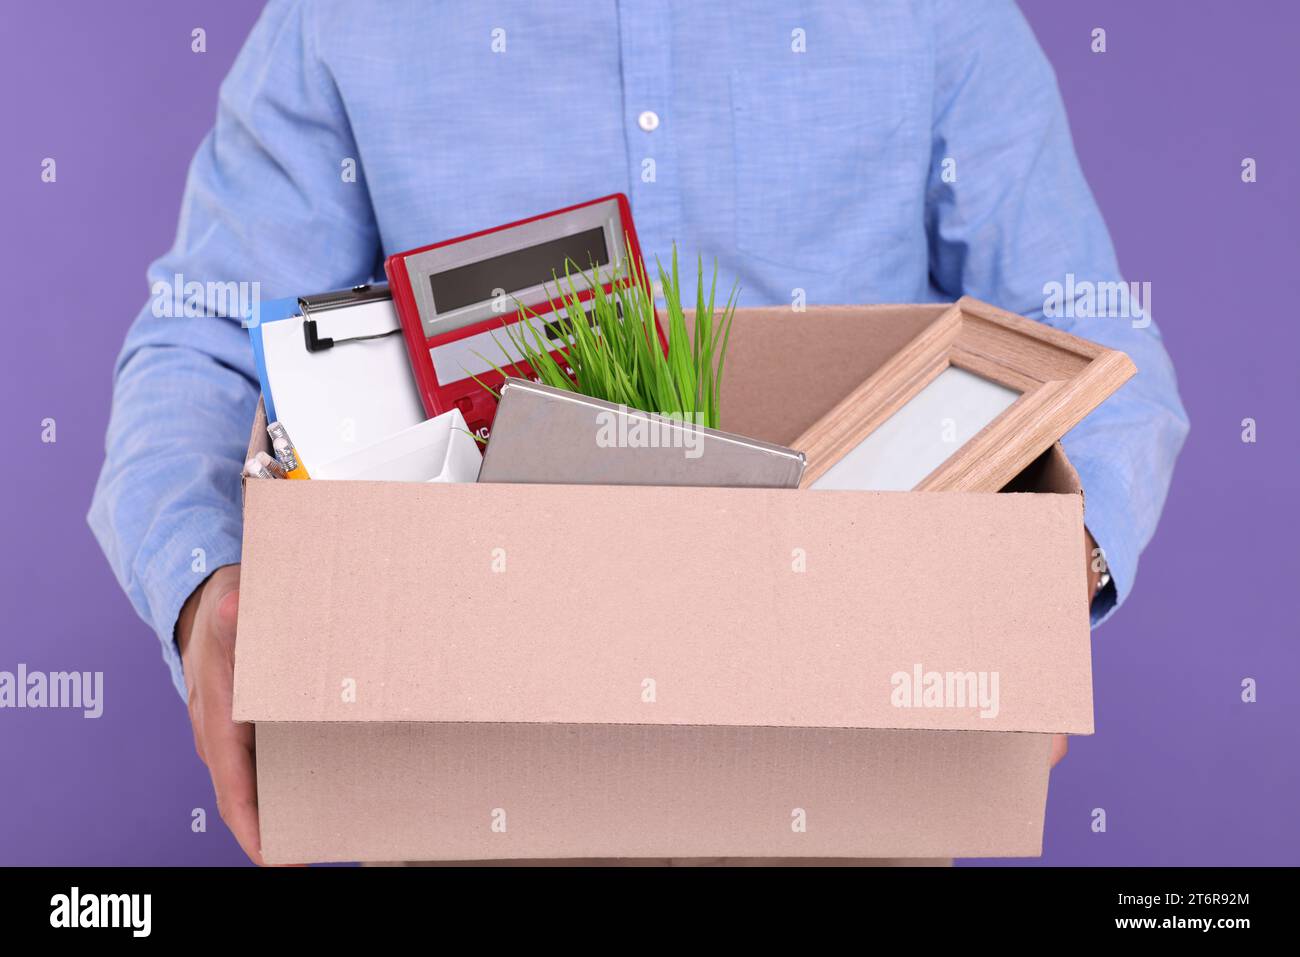 Unemployed man with box of personal office belongings on purple background, closeup Stock Photo